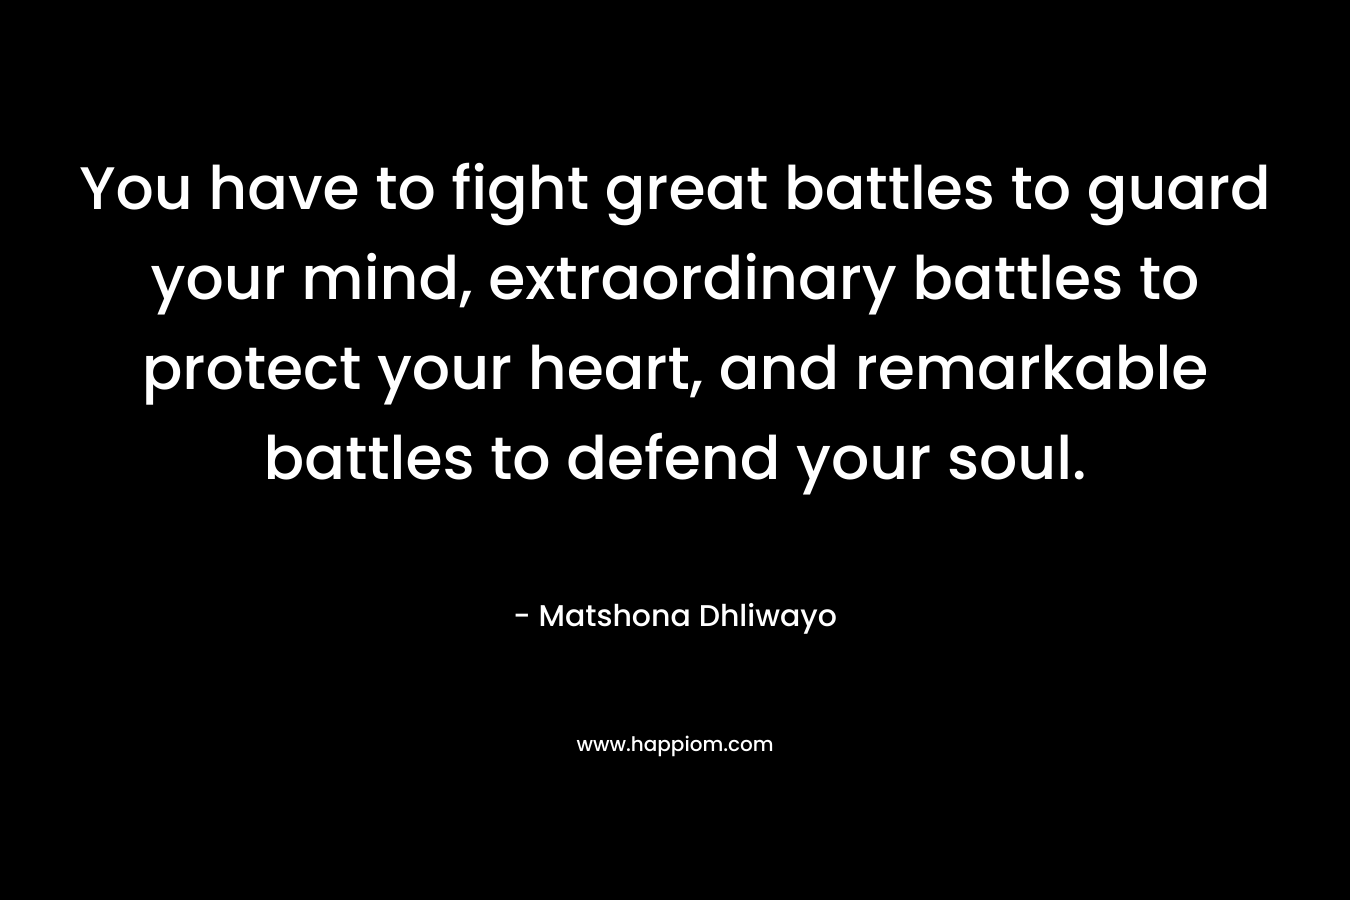 You have to fight great battles to guard your mind, extraordinary battles to protect your heart, and remarkable battles to defend your soul.